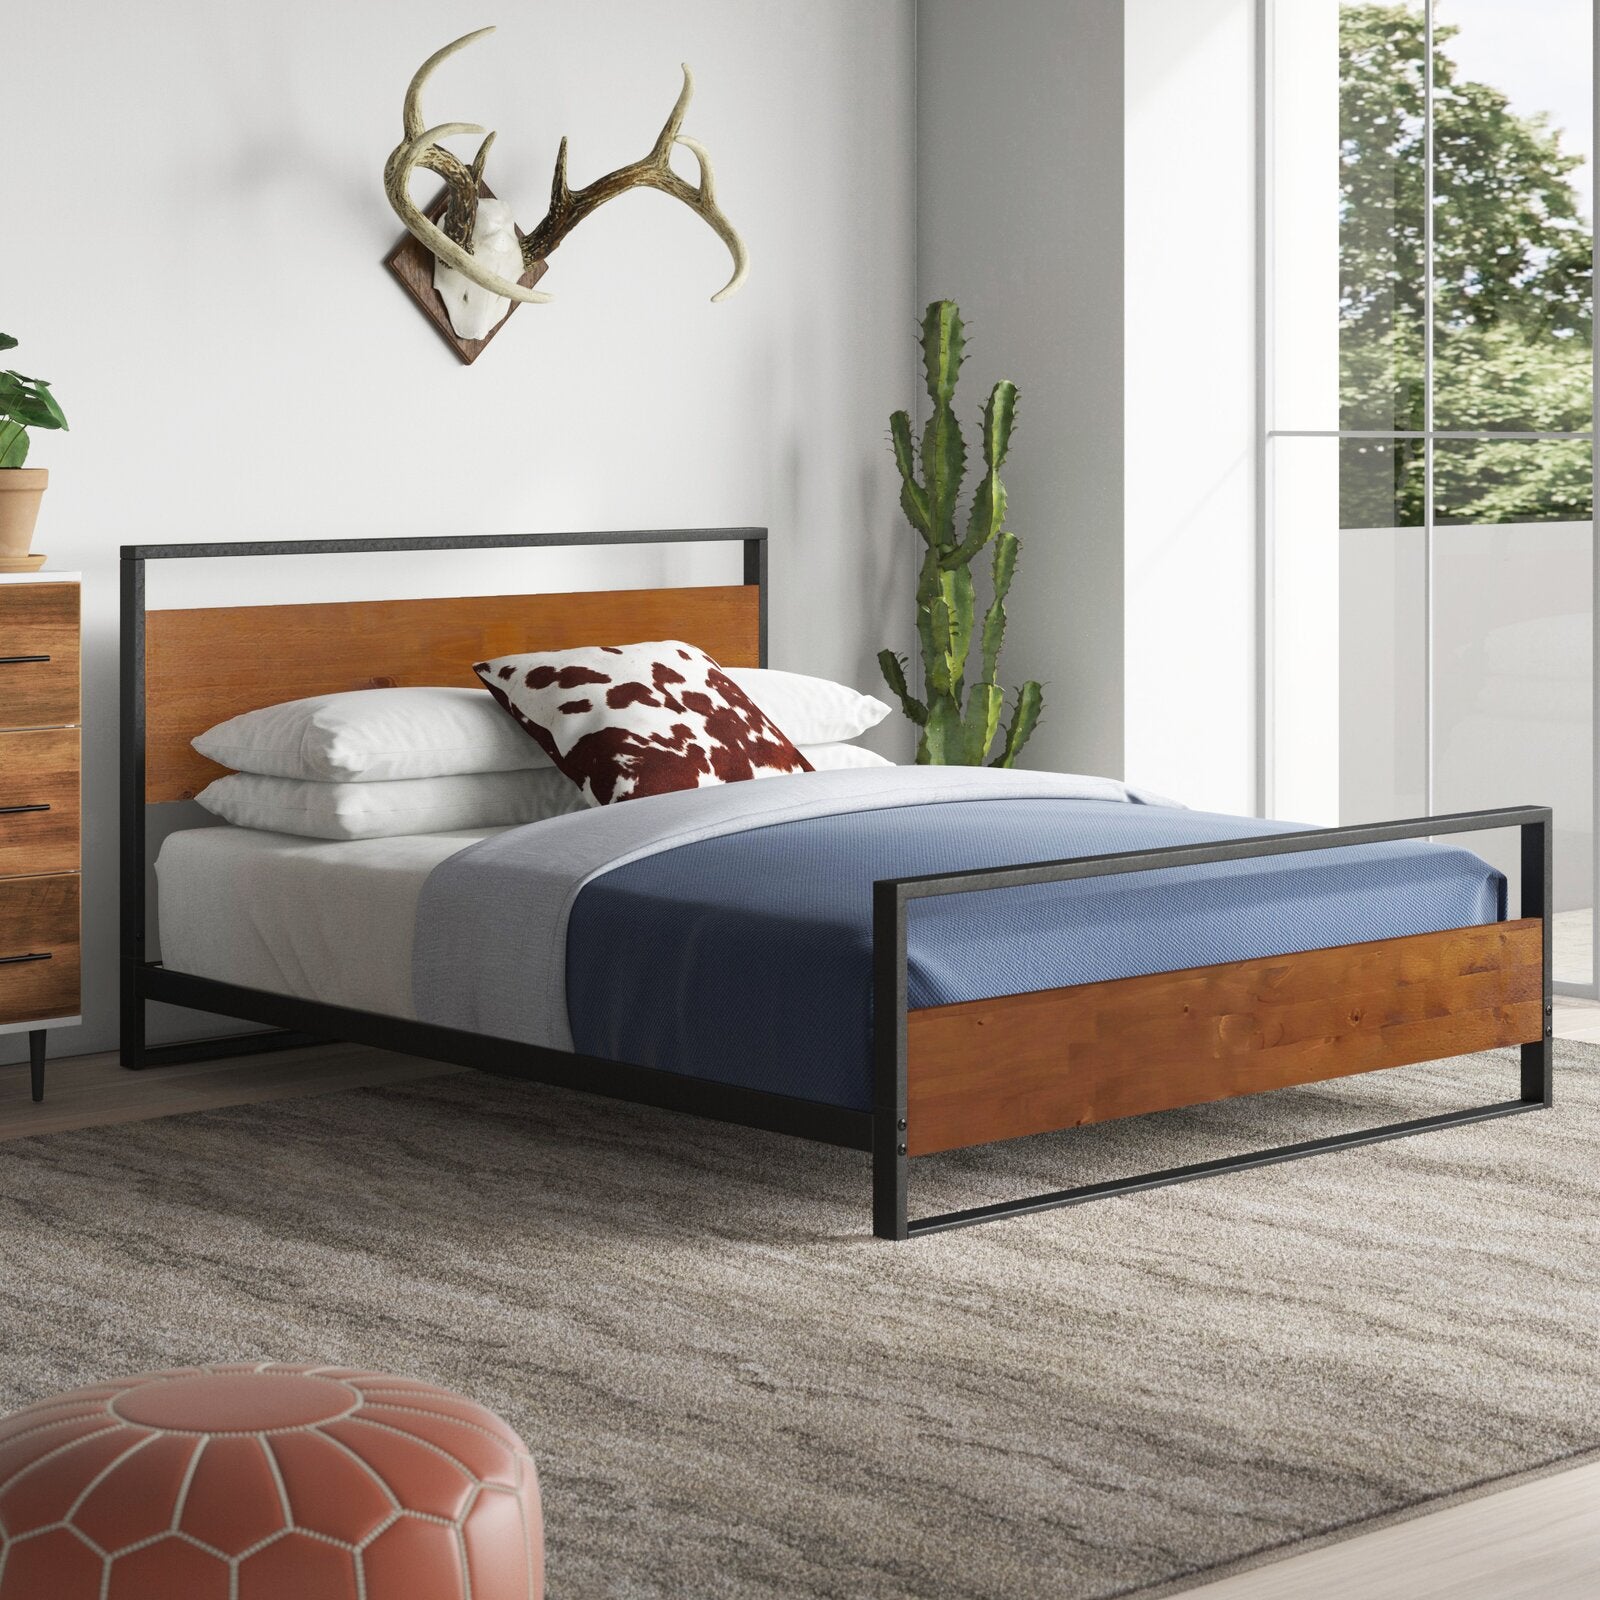 Zinus Suzanne Metal And Pine Wood Platform Bed Frame With Headboard And Footboard Mattress Base 